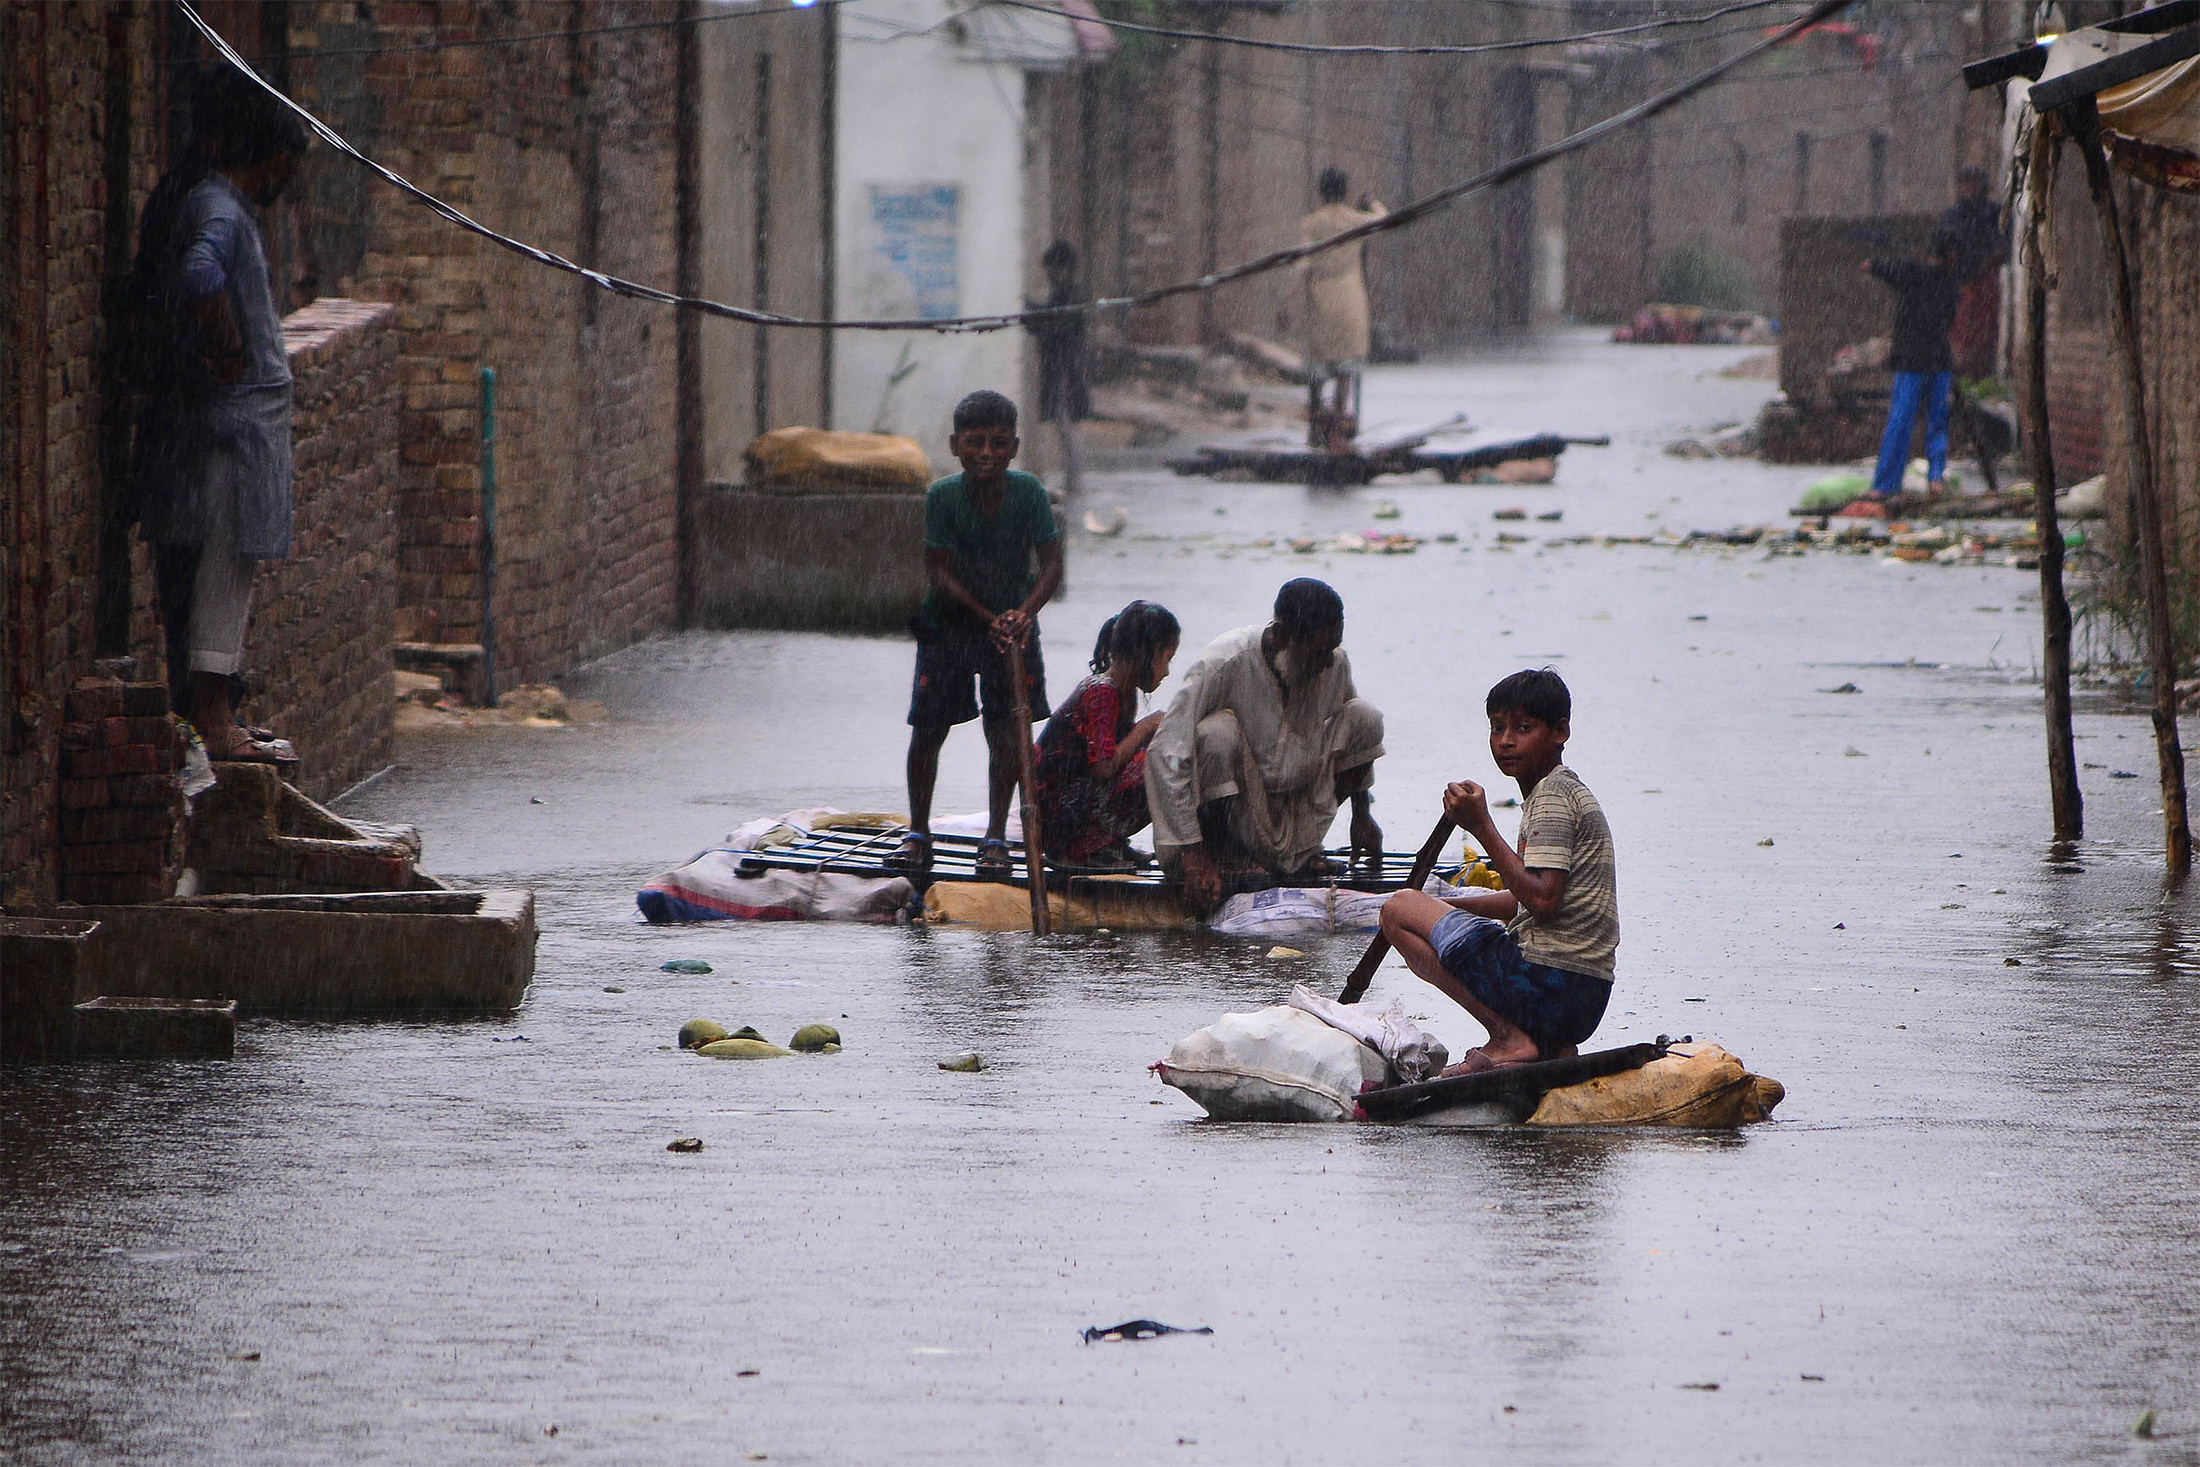 Residents use rafts to make their way along a flooded street in in Hyderabad, Pakistan, on Aug. 24.